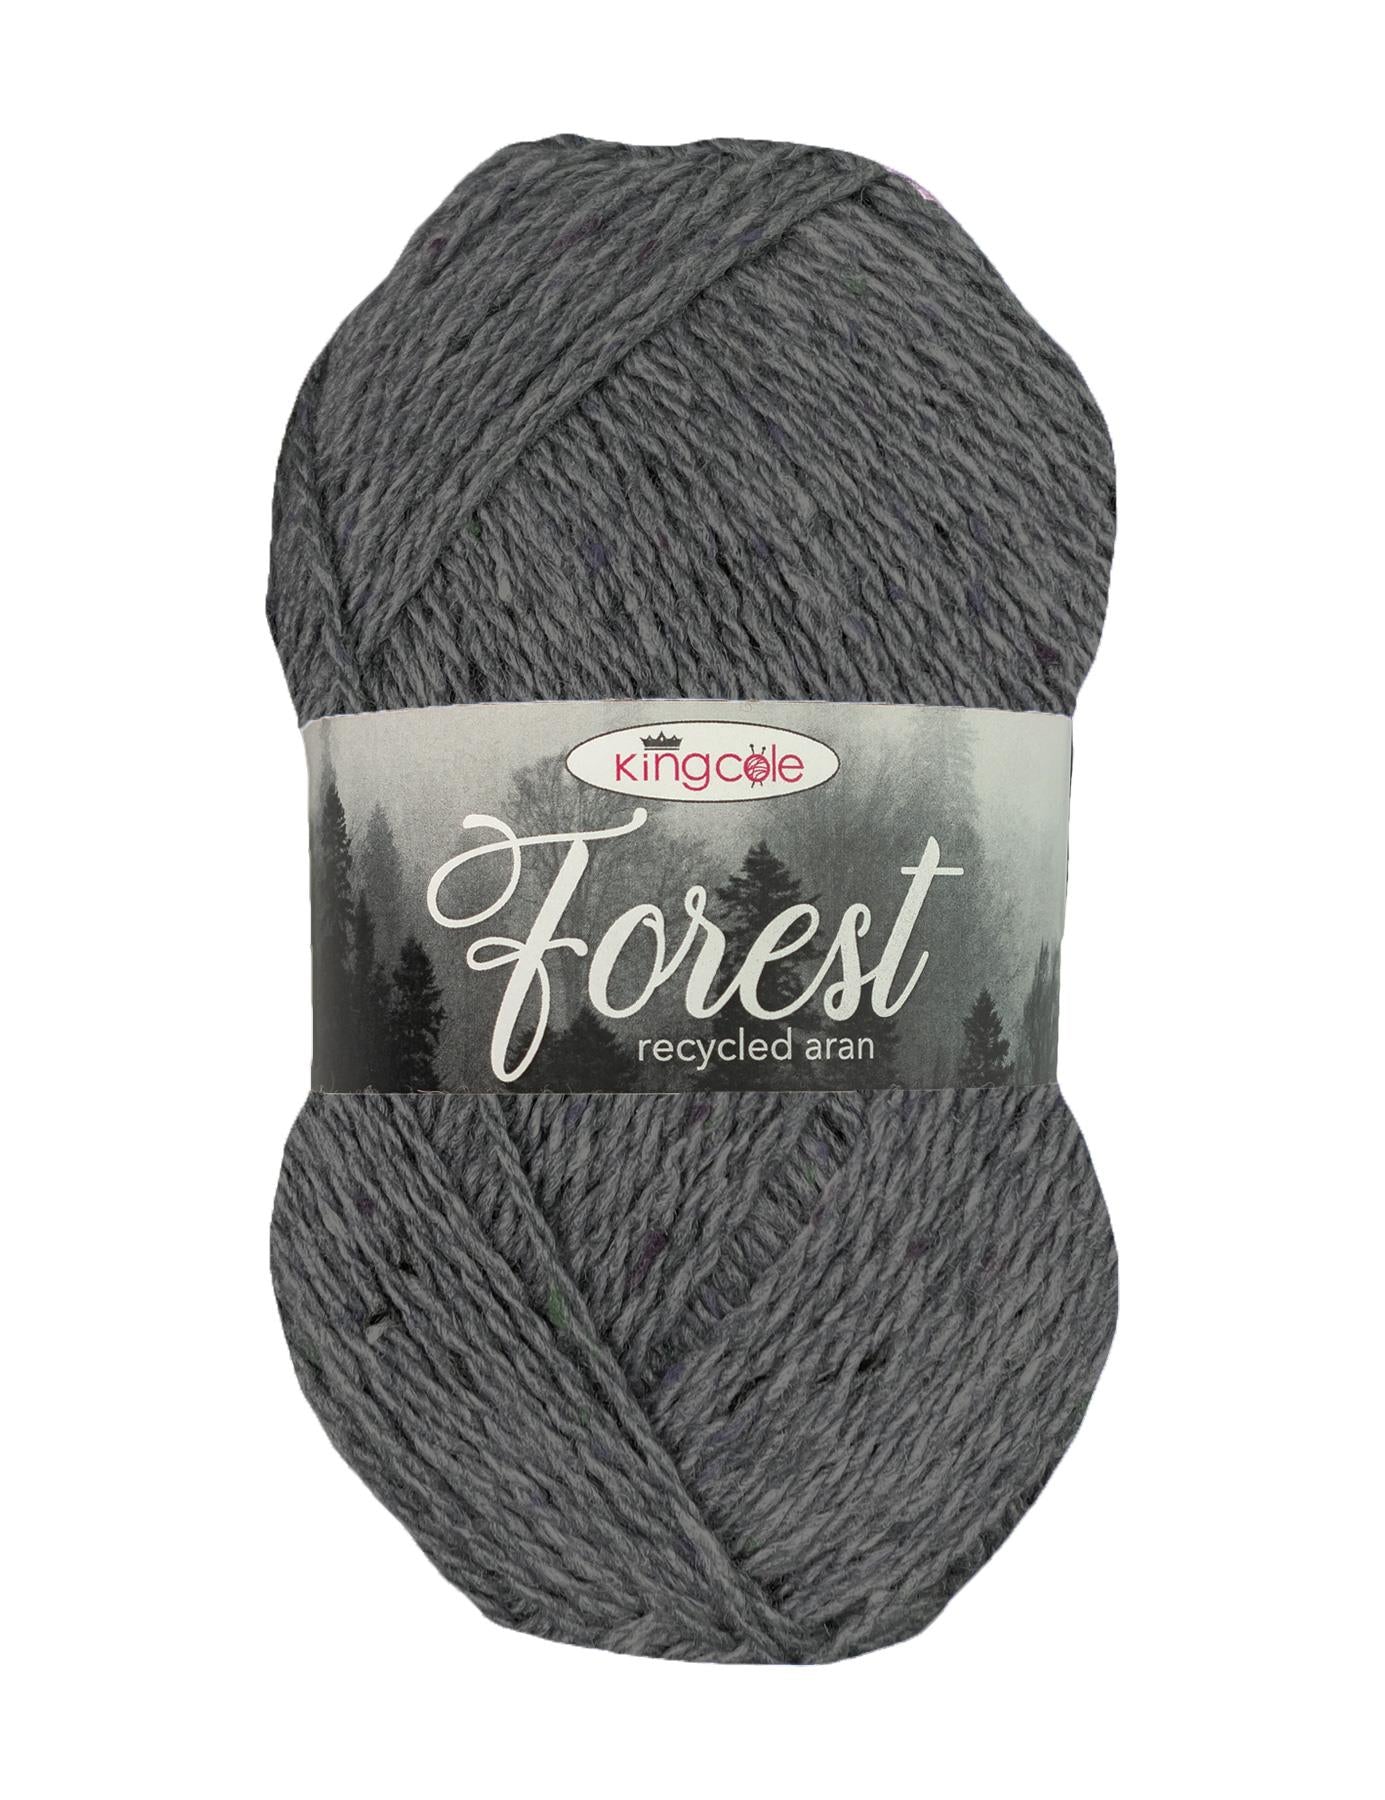 Gisburn Forest 100% recycled aran yarn by King Cole (100g)